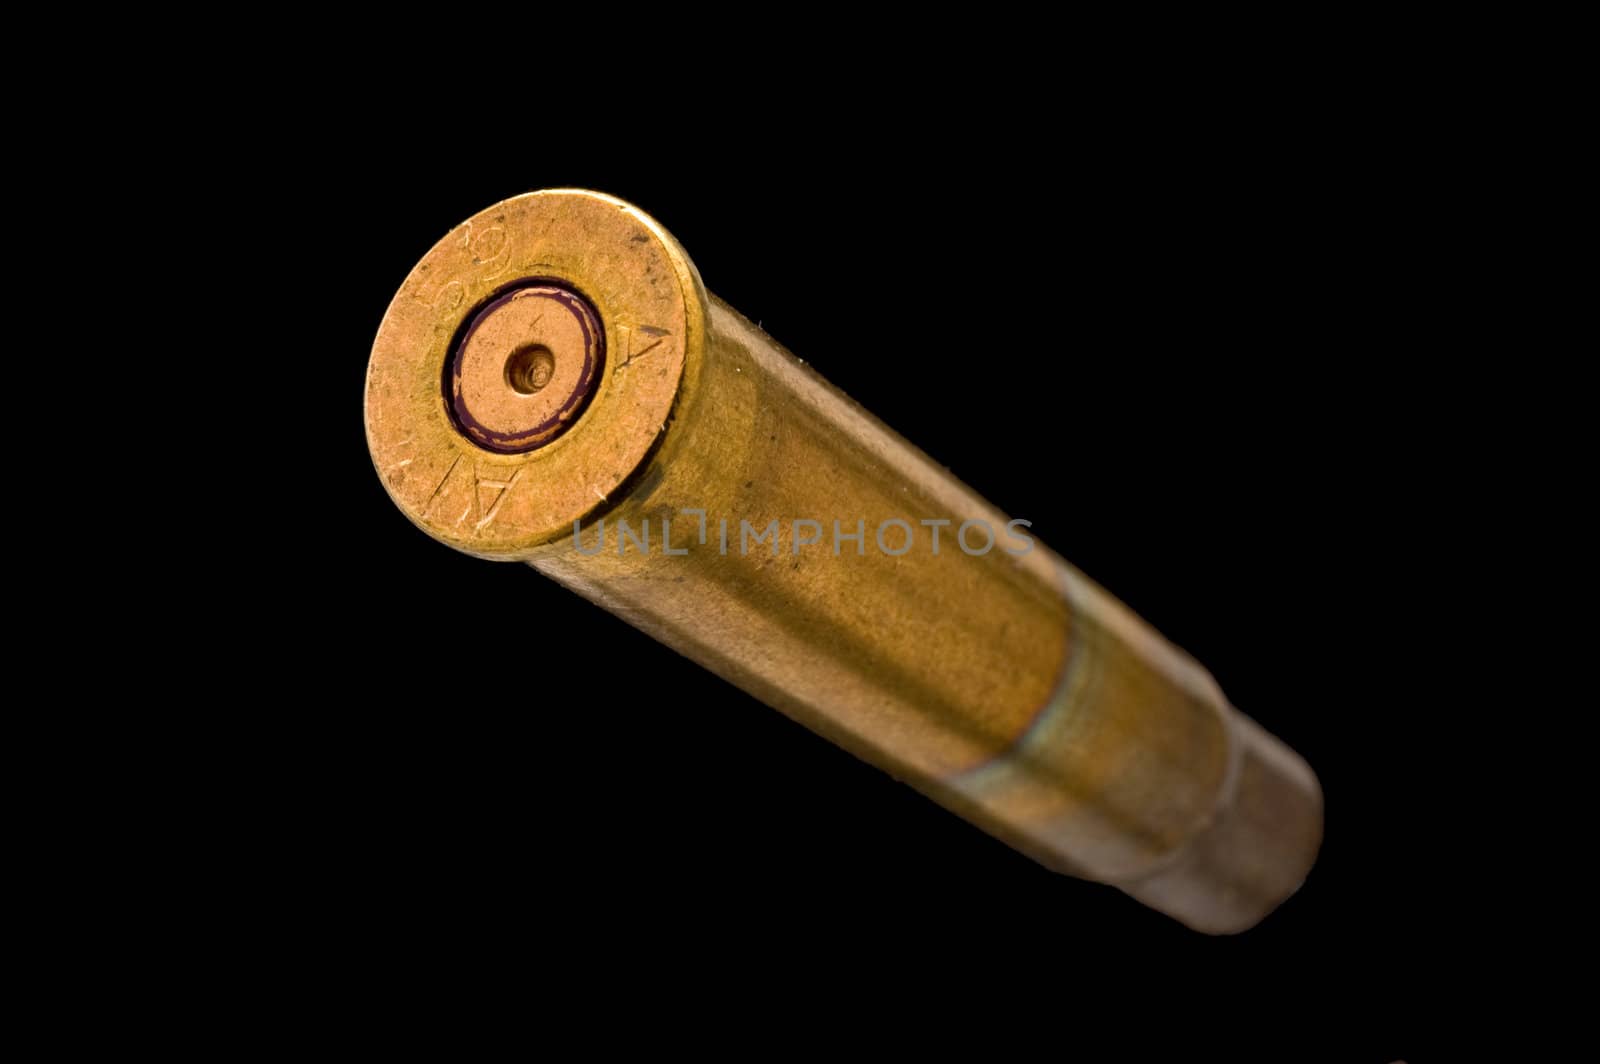 Dirty Used .303 British shell casing on black